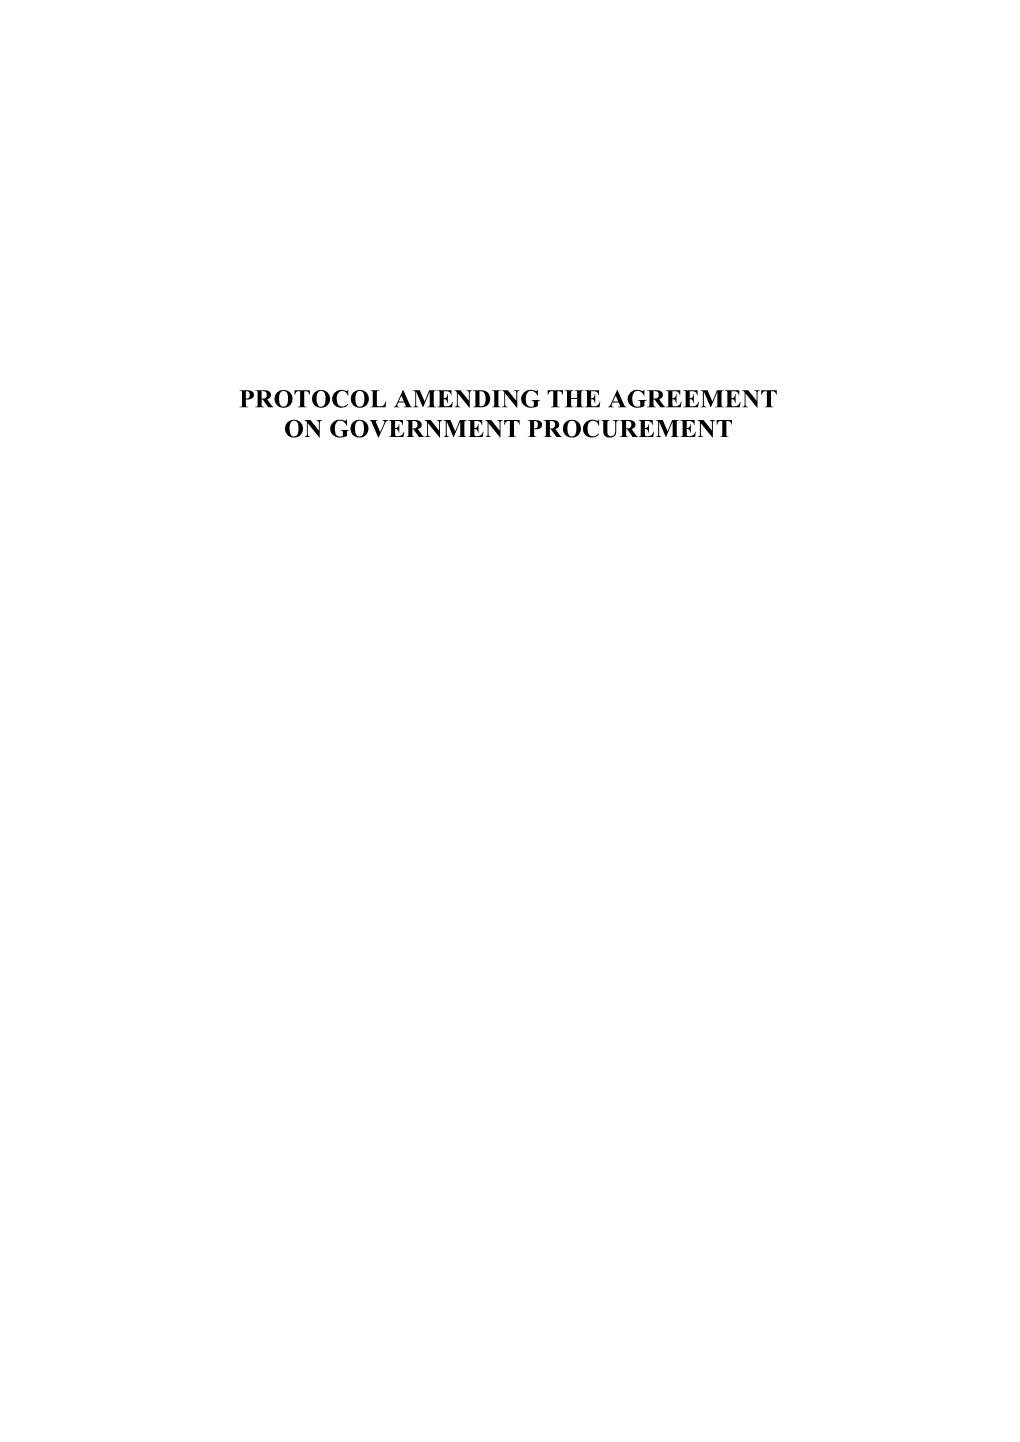 Protocol Amending the Agreement on Government Procurement